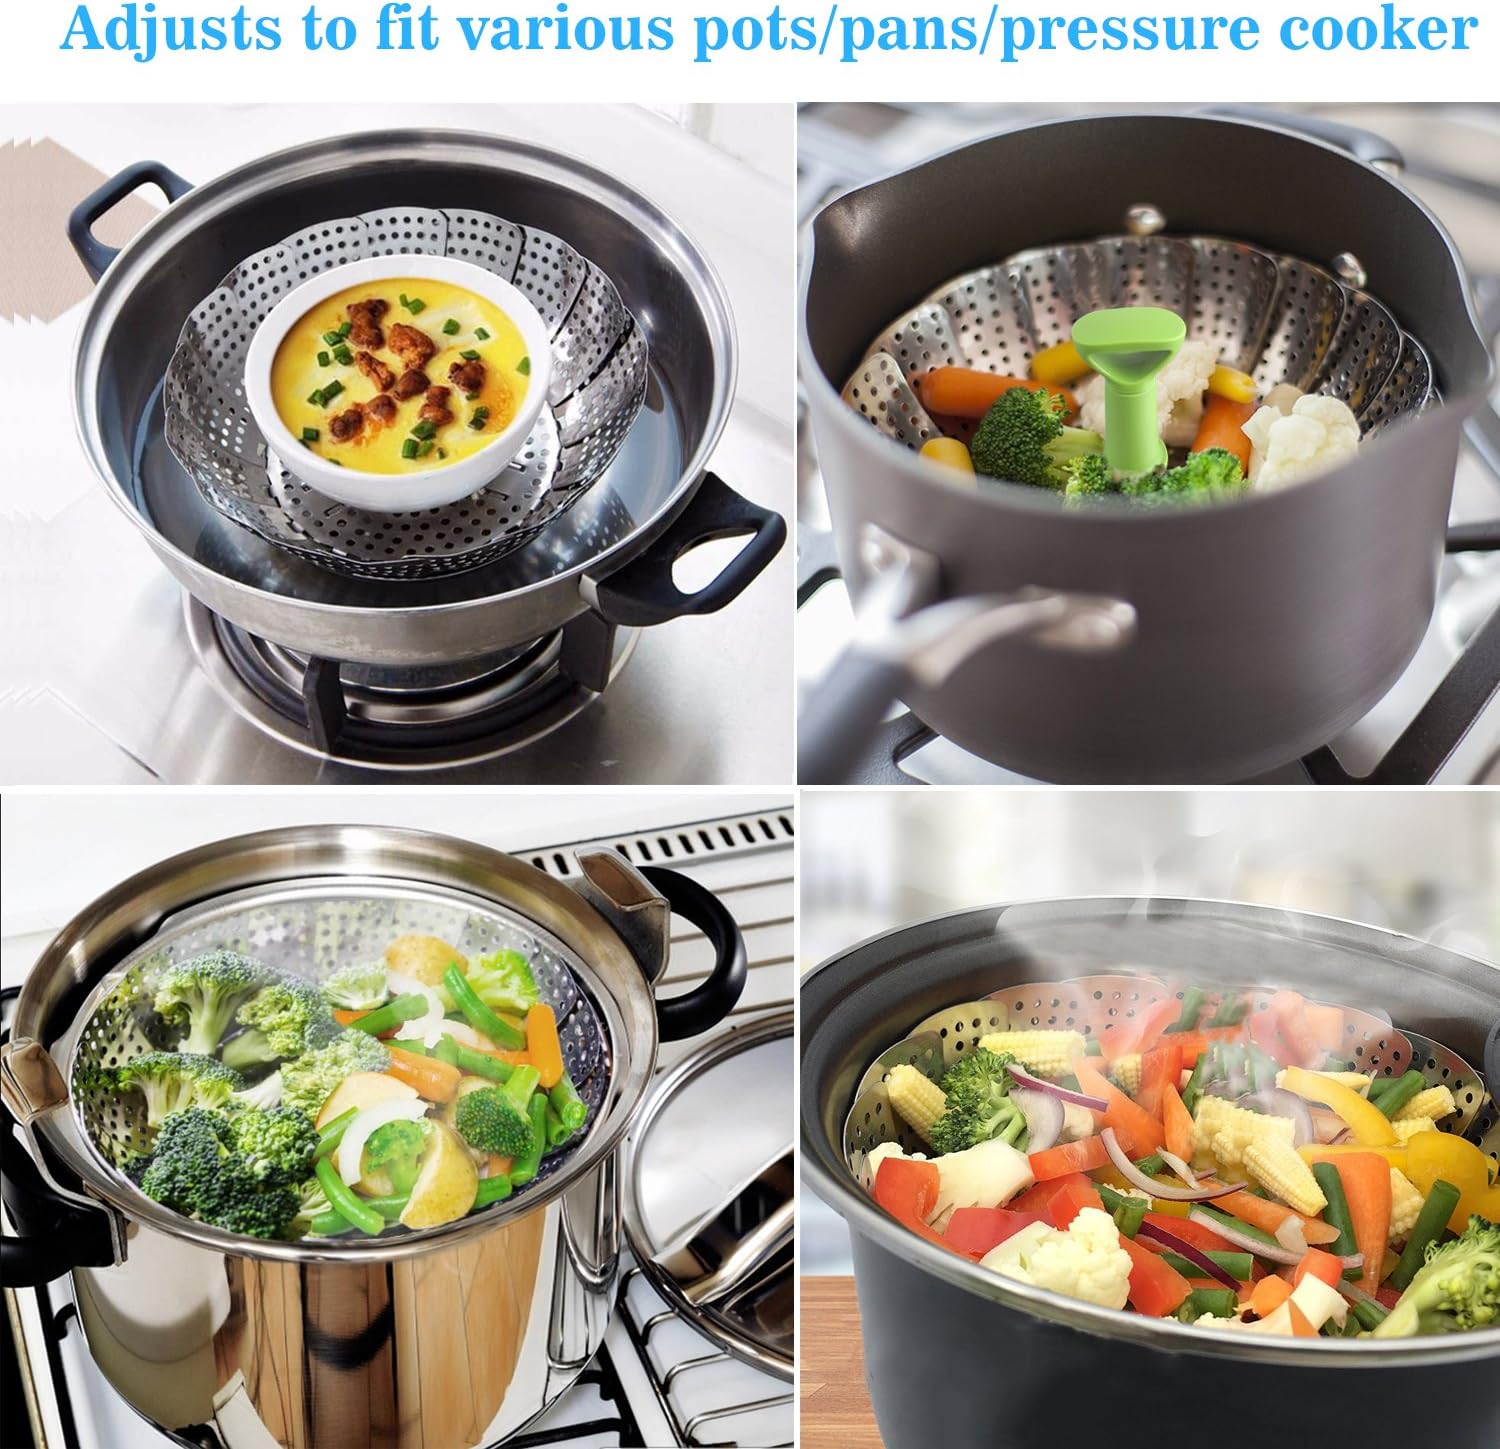 Consevisen Steamer Basket Stainless Steel Vegetable Steamer Basket Folding Steamer Insert for Veggie Fish Seafood Cooking, Expandable to Fit Various Size Pot (6.4